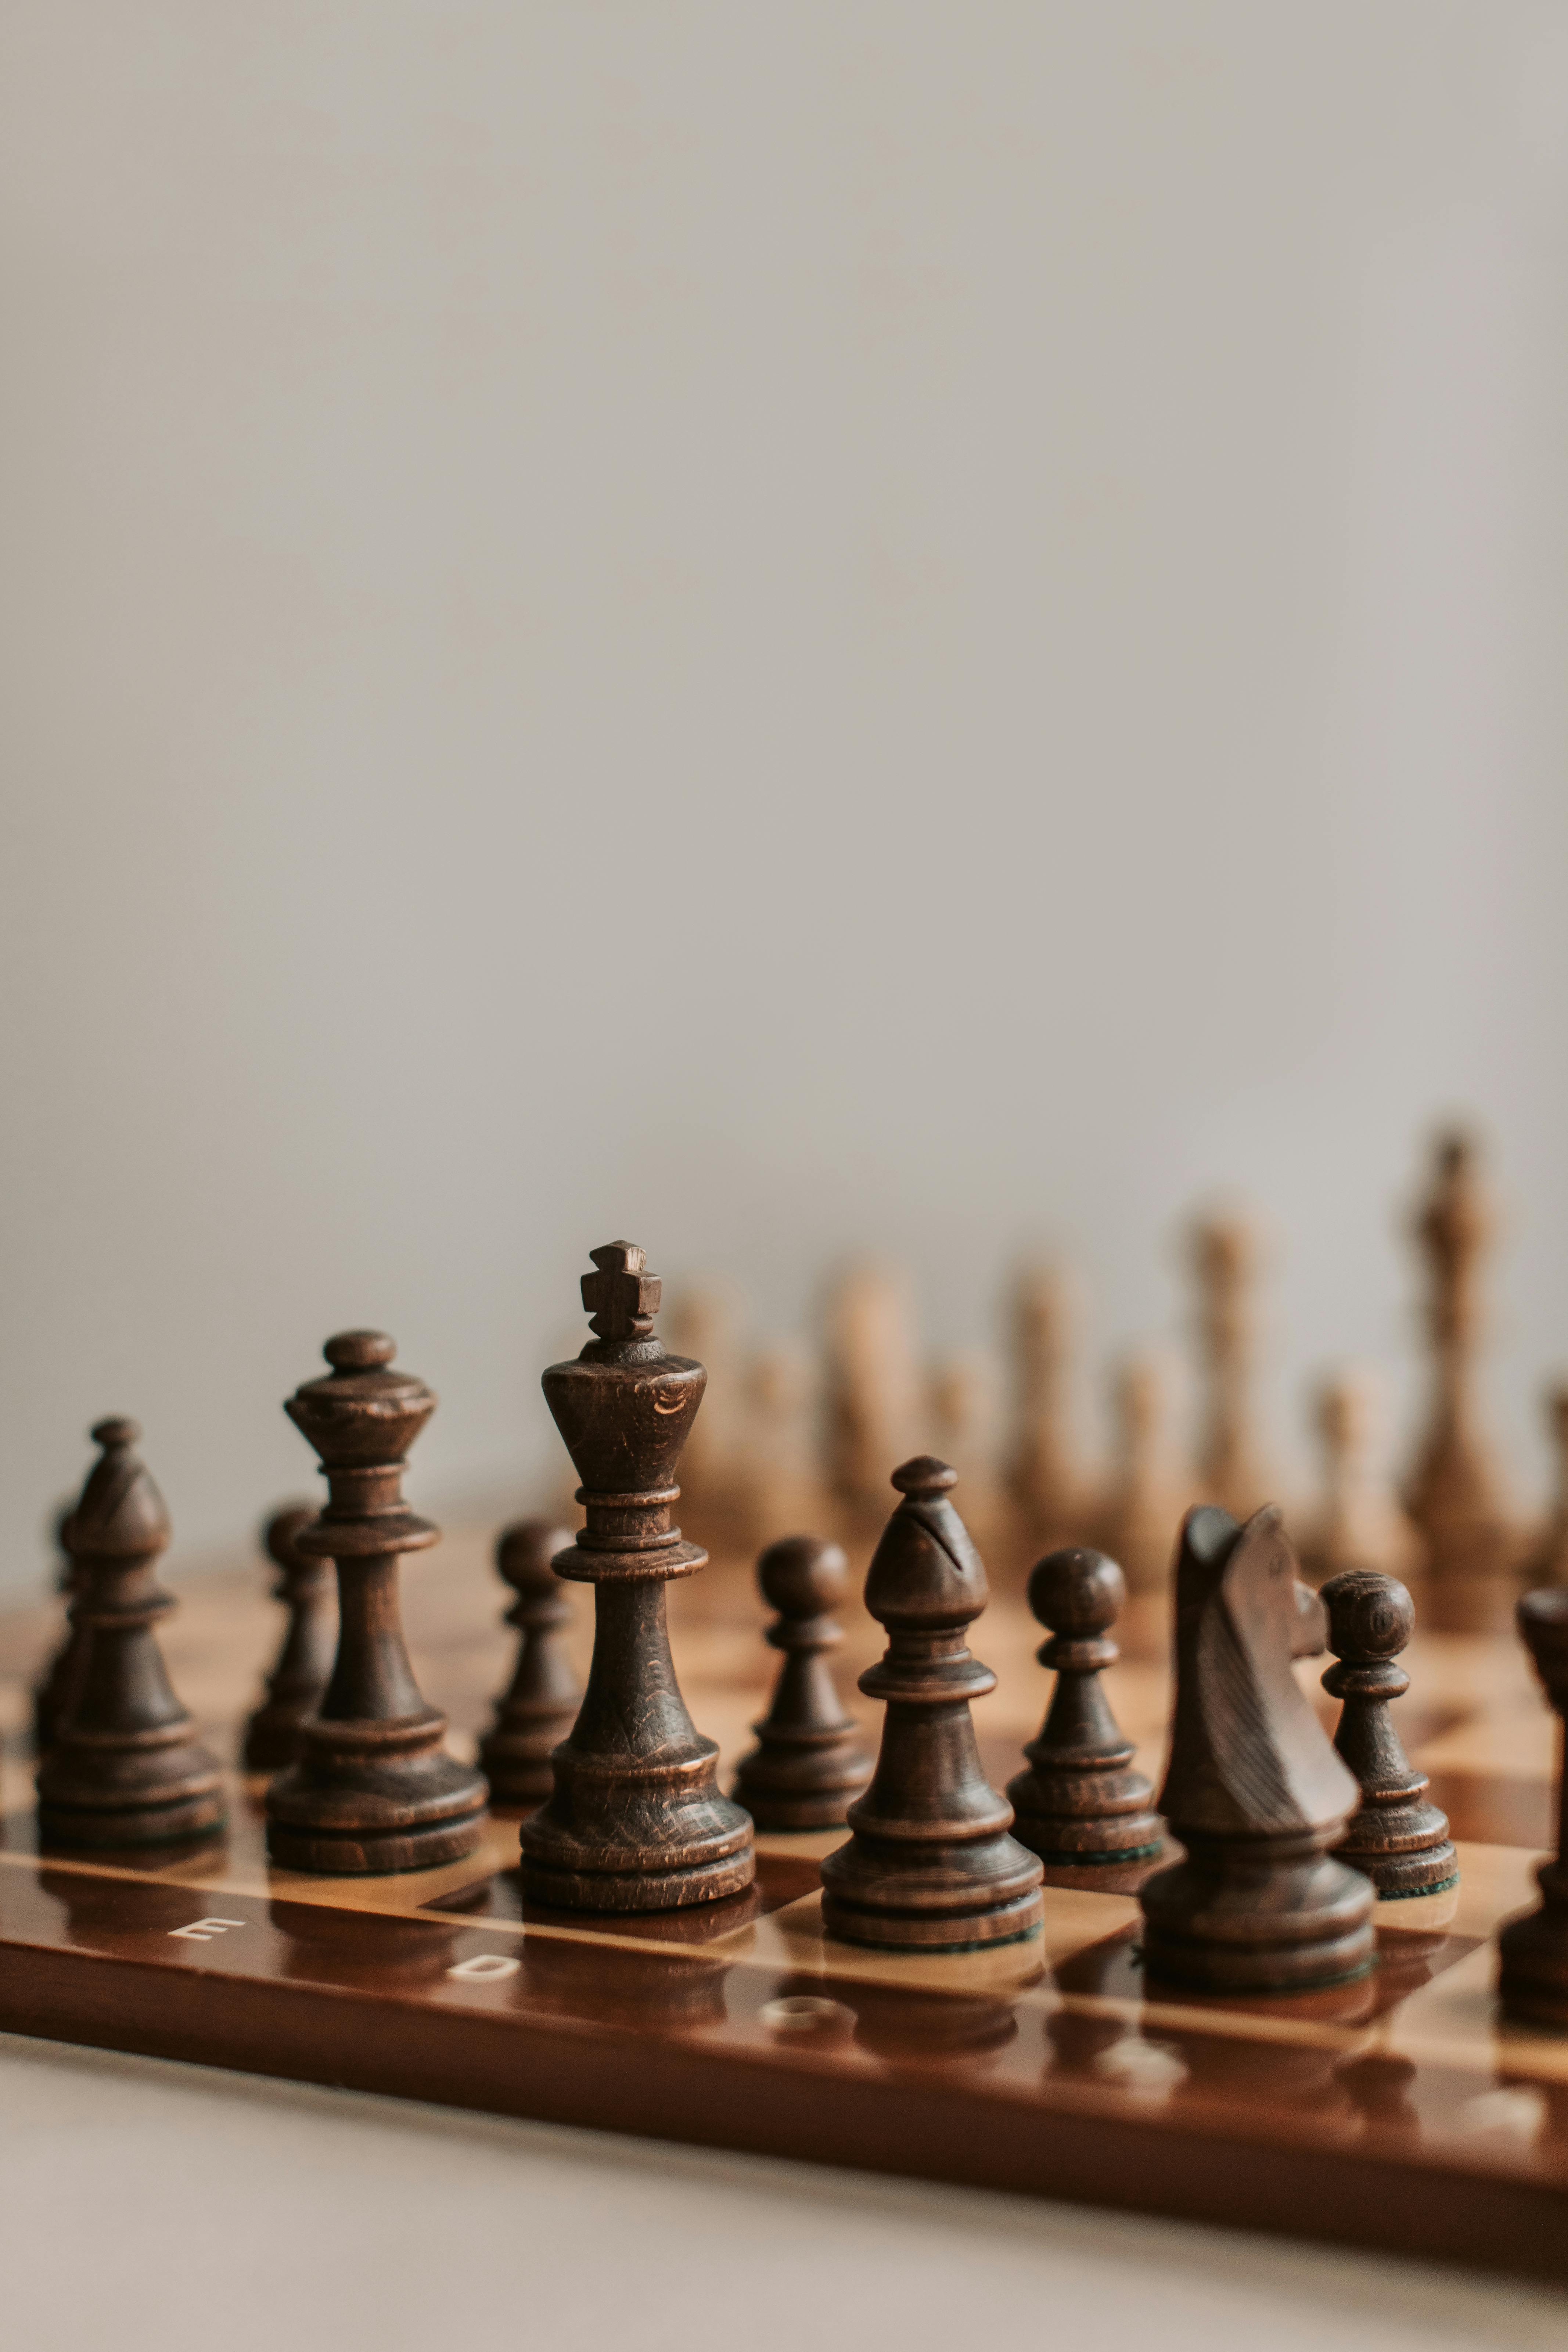 51+ Thousand Chess Wallpaper Royalty-Free Images, Stock Photos